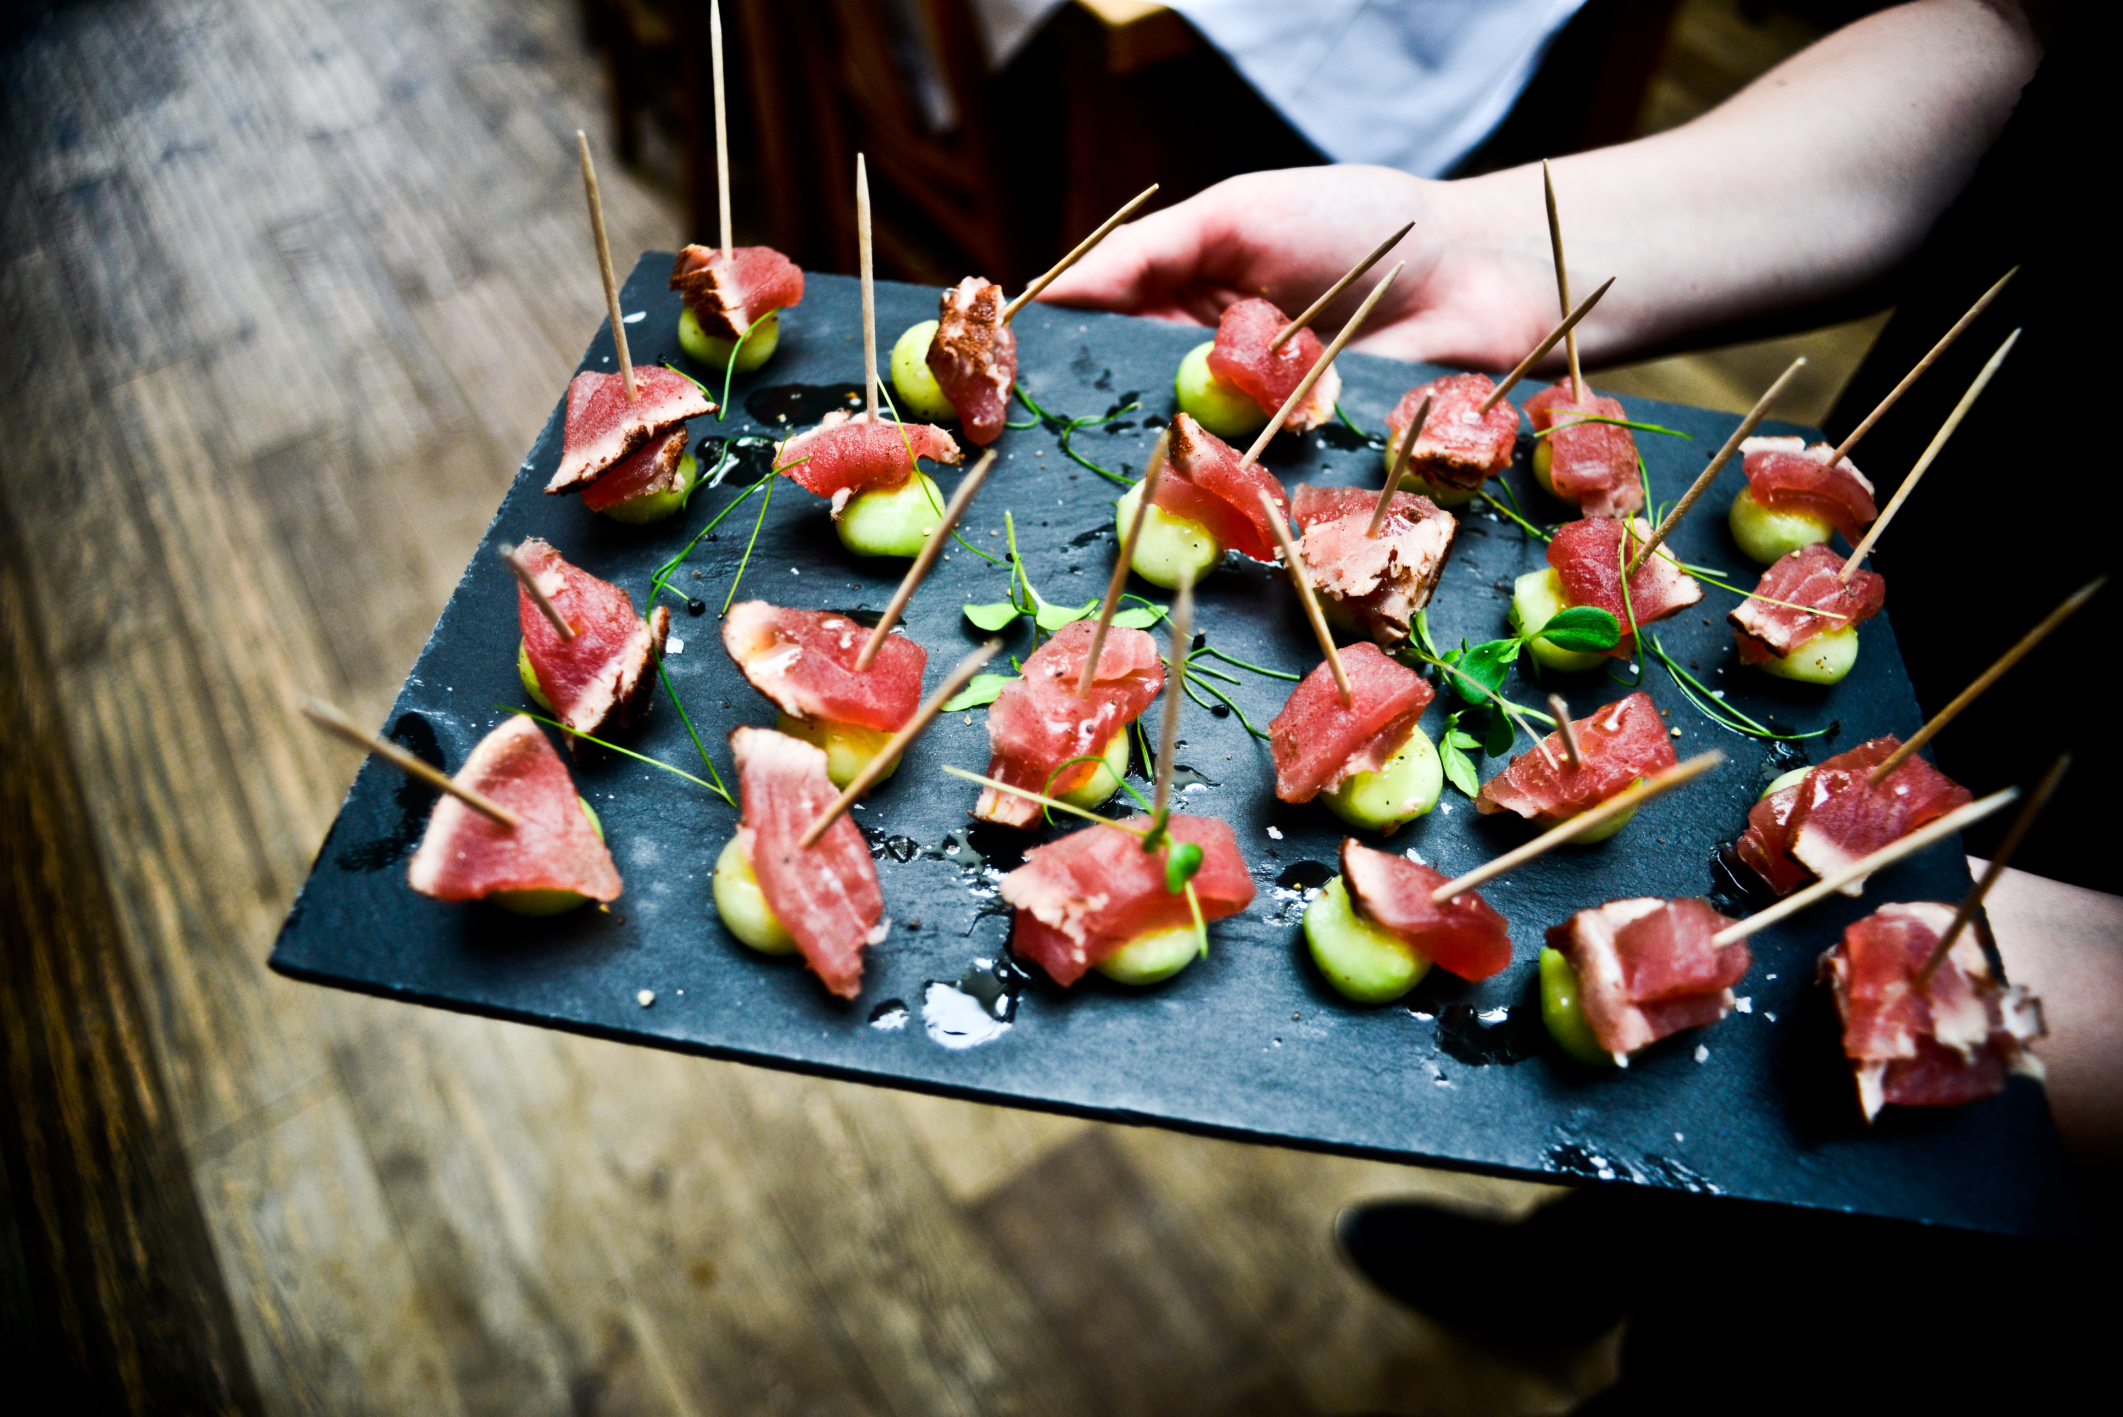 What types of insurance do you need for a catering company?